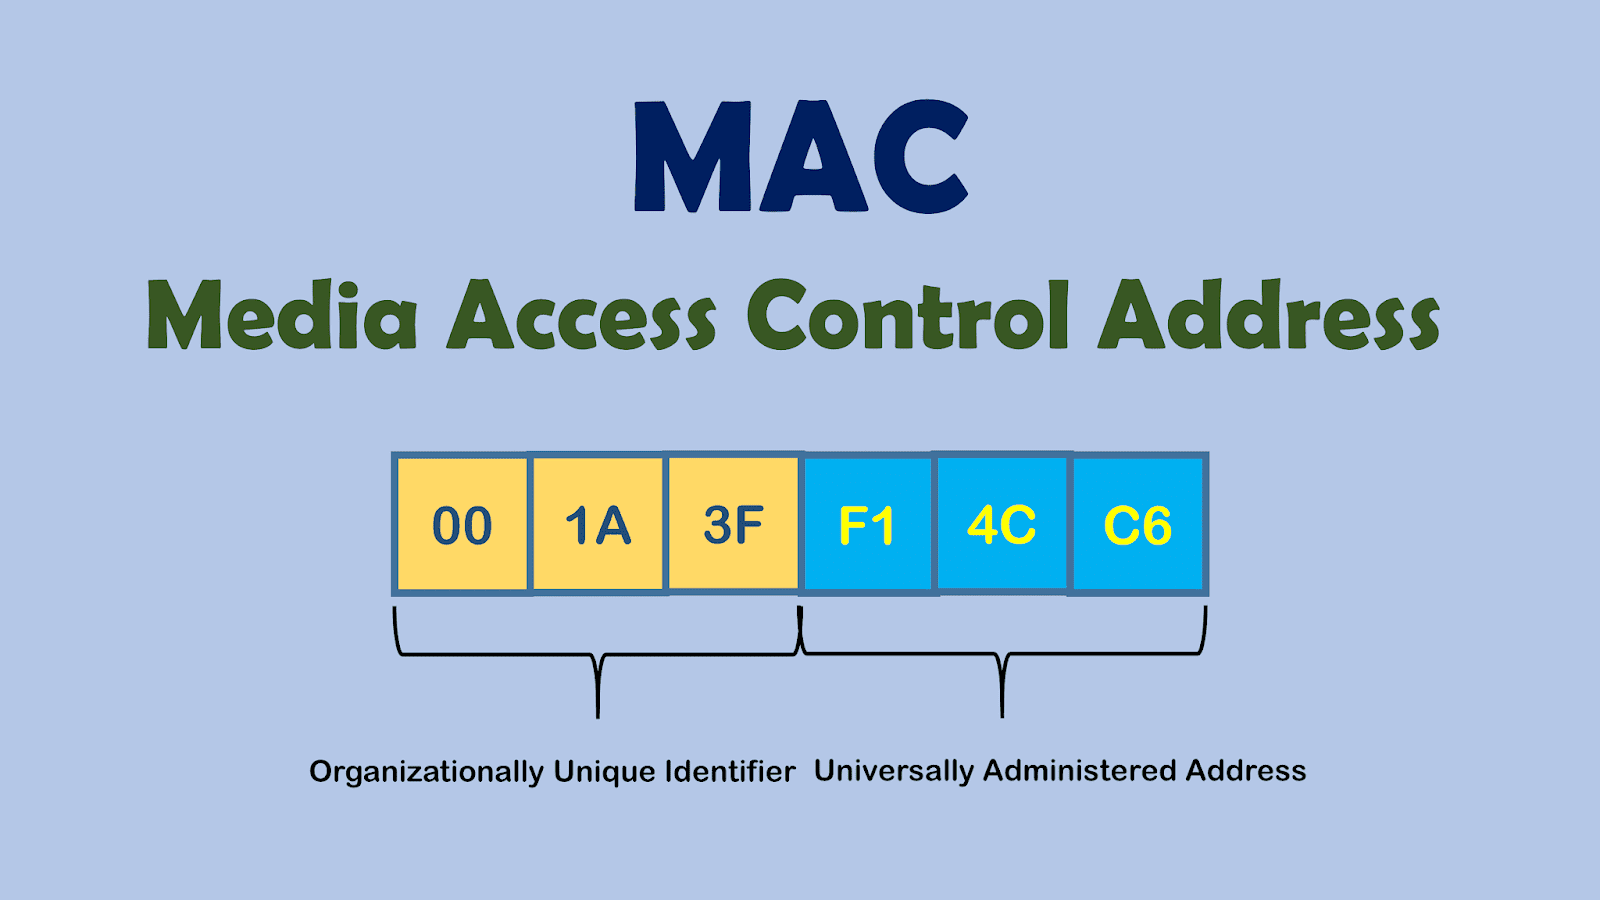 What Does Mac Stand For In Mac Address